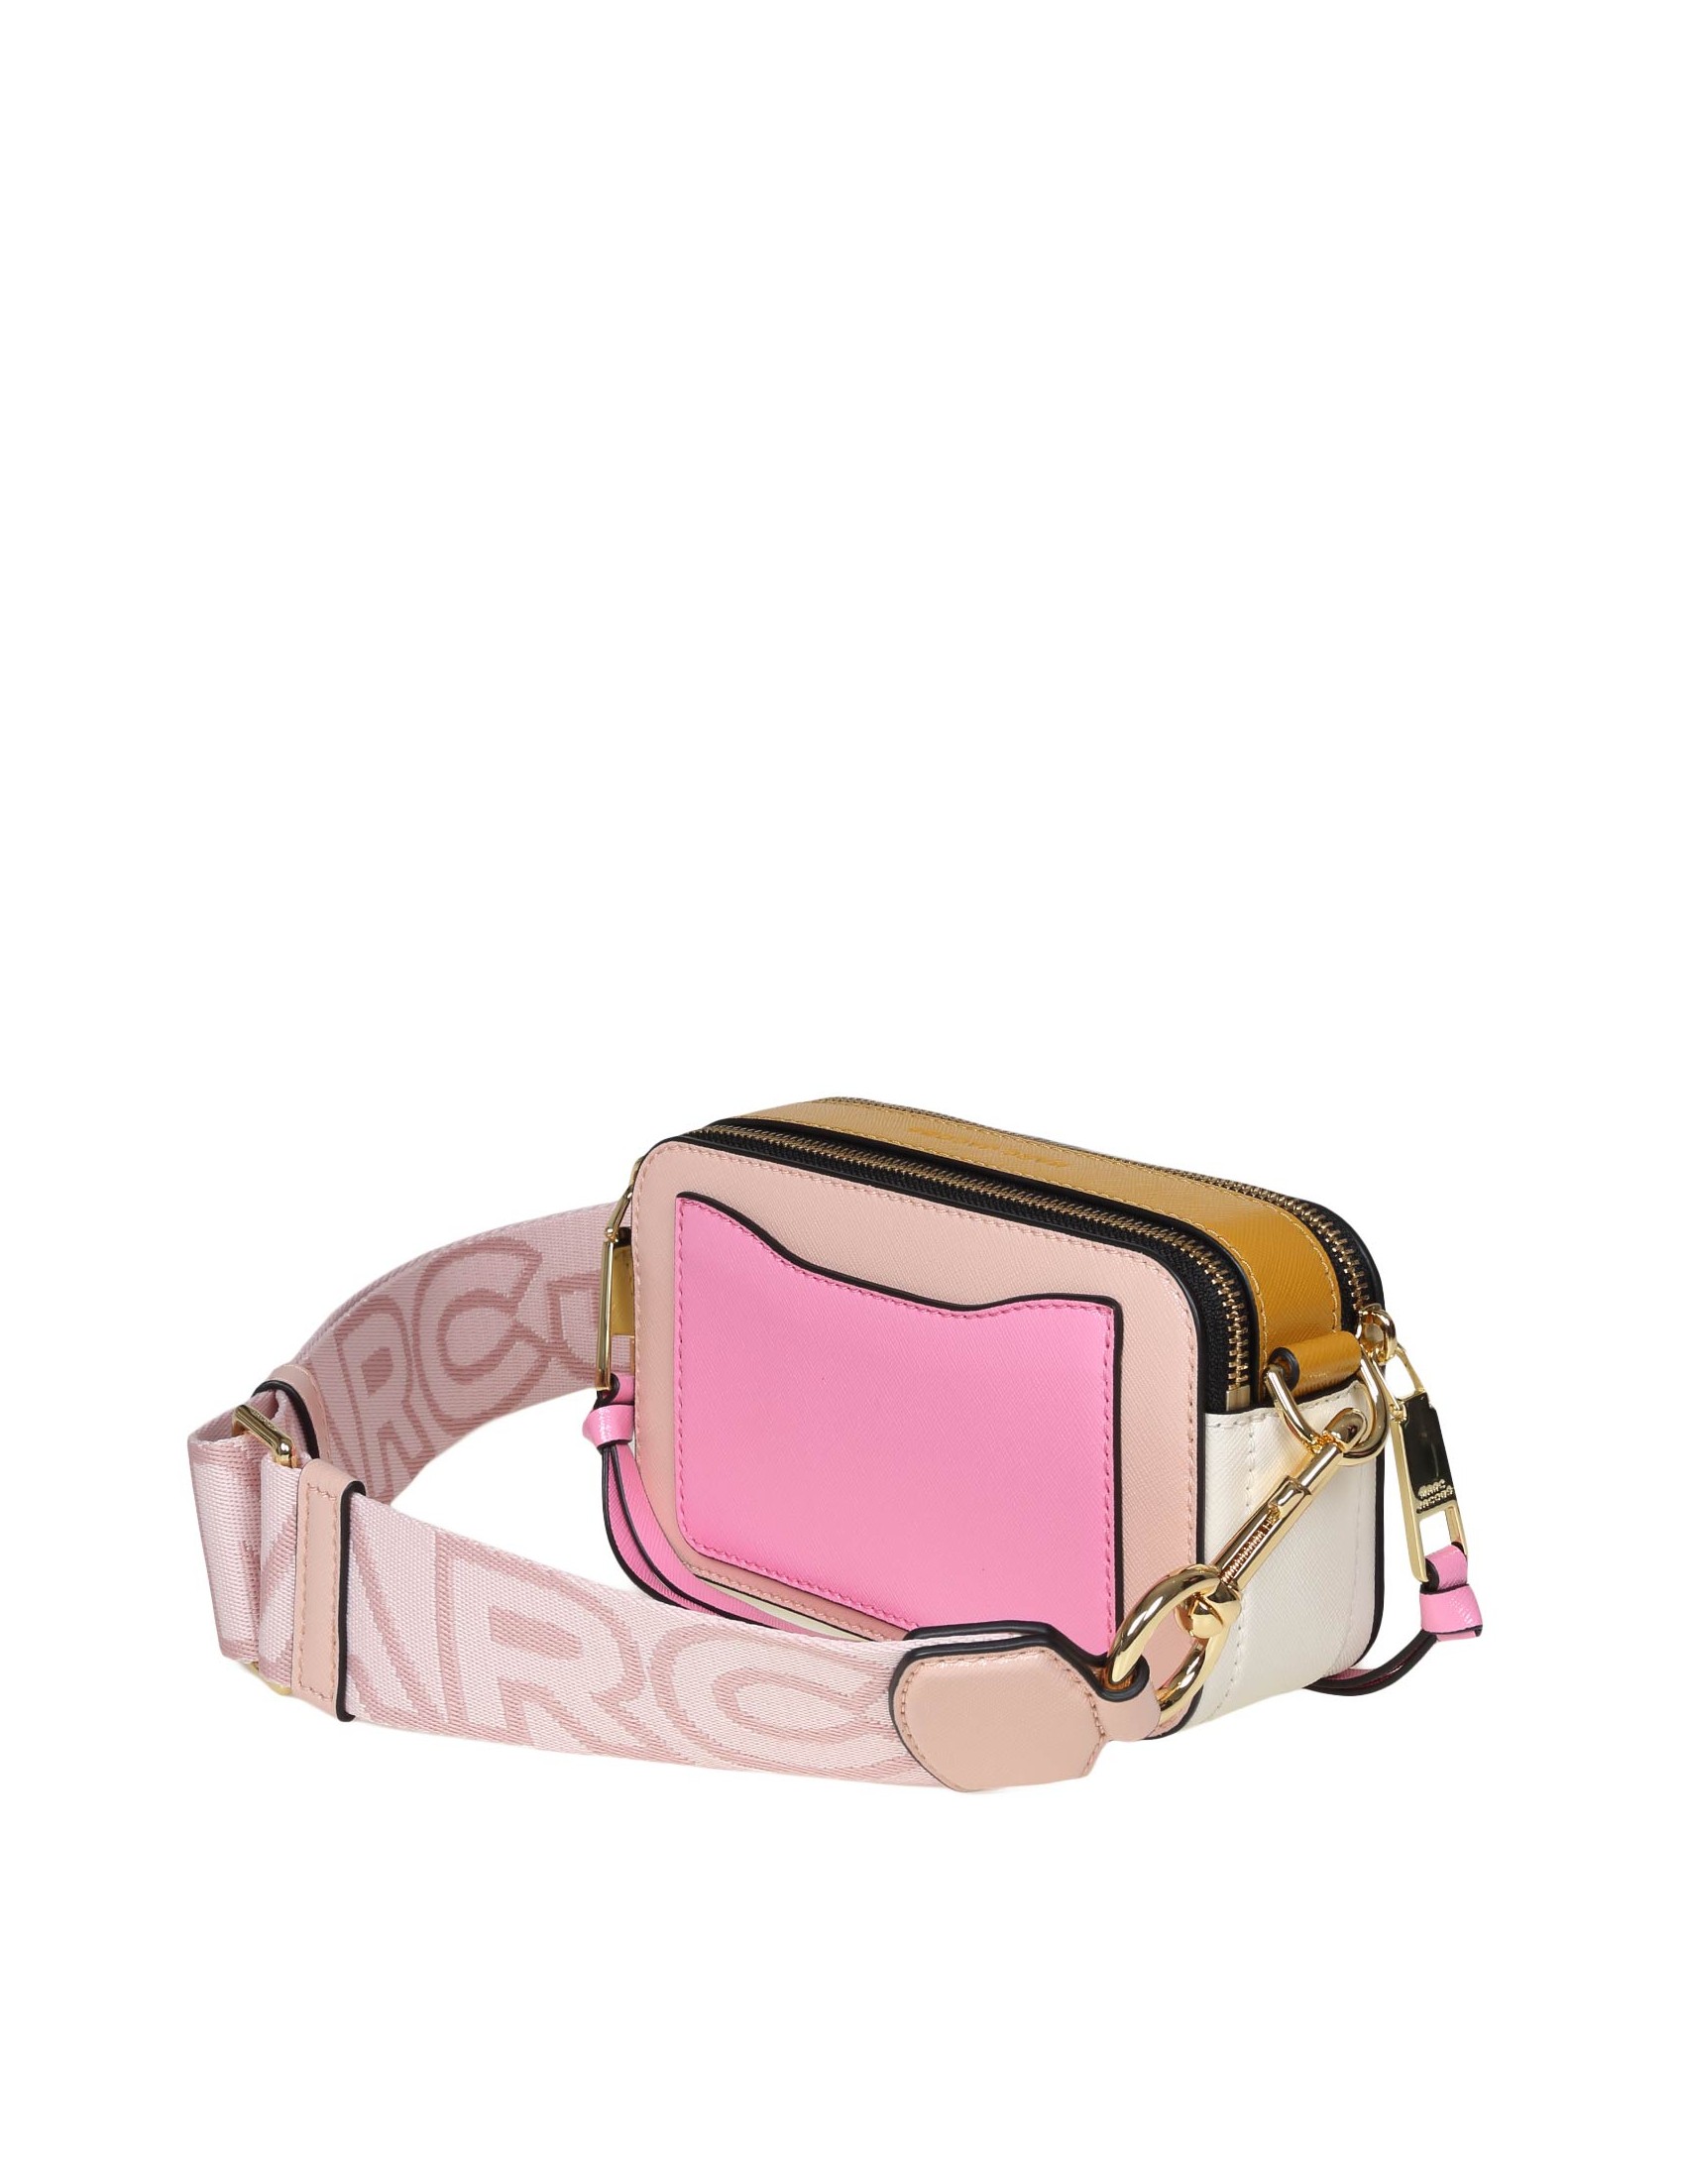 Marc Jacobs Snapshot Bag In Pink Leather and Prints ref.357154